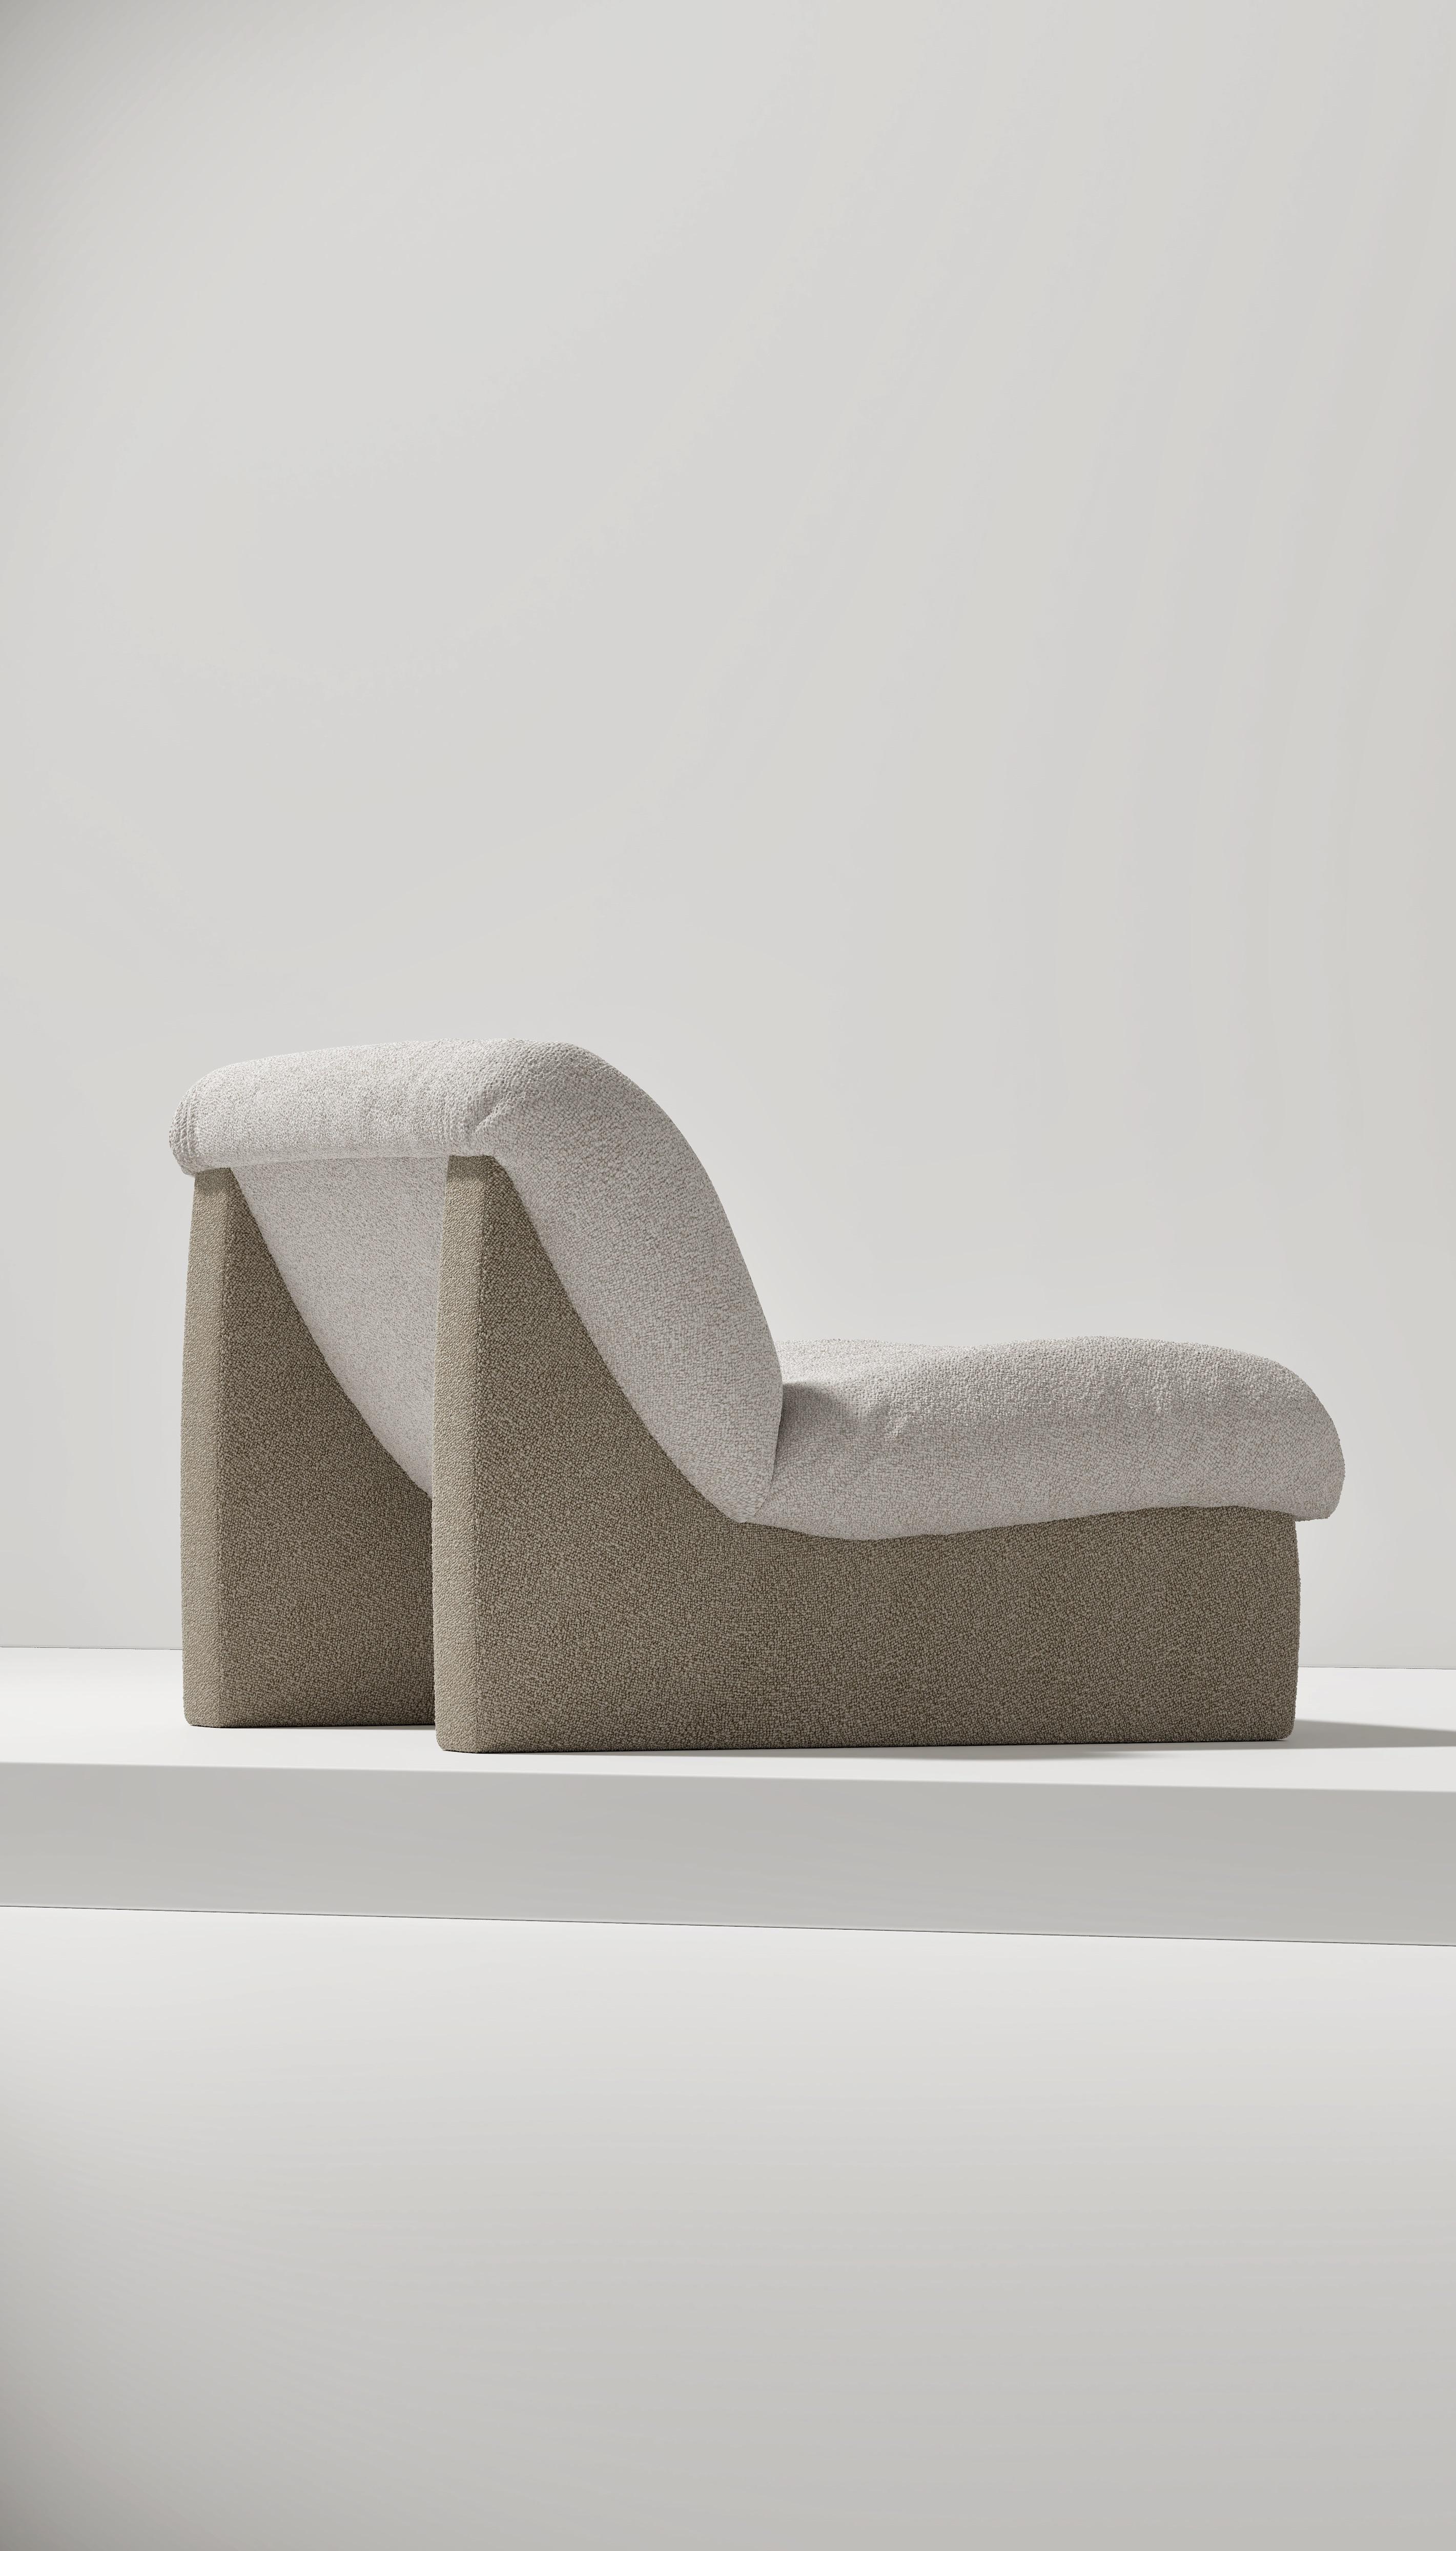 Snow sofa straight by Note Design Studio
Dimensions: D 100 x W 100 x H 74 cm.
Materials: upholstery. 

This modular sofa is composed of: 
1 x Module 01 : straight
Prices may vary according to the fabric choice.

Snow is a modular sofa